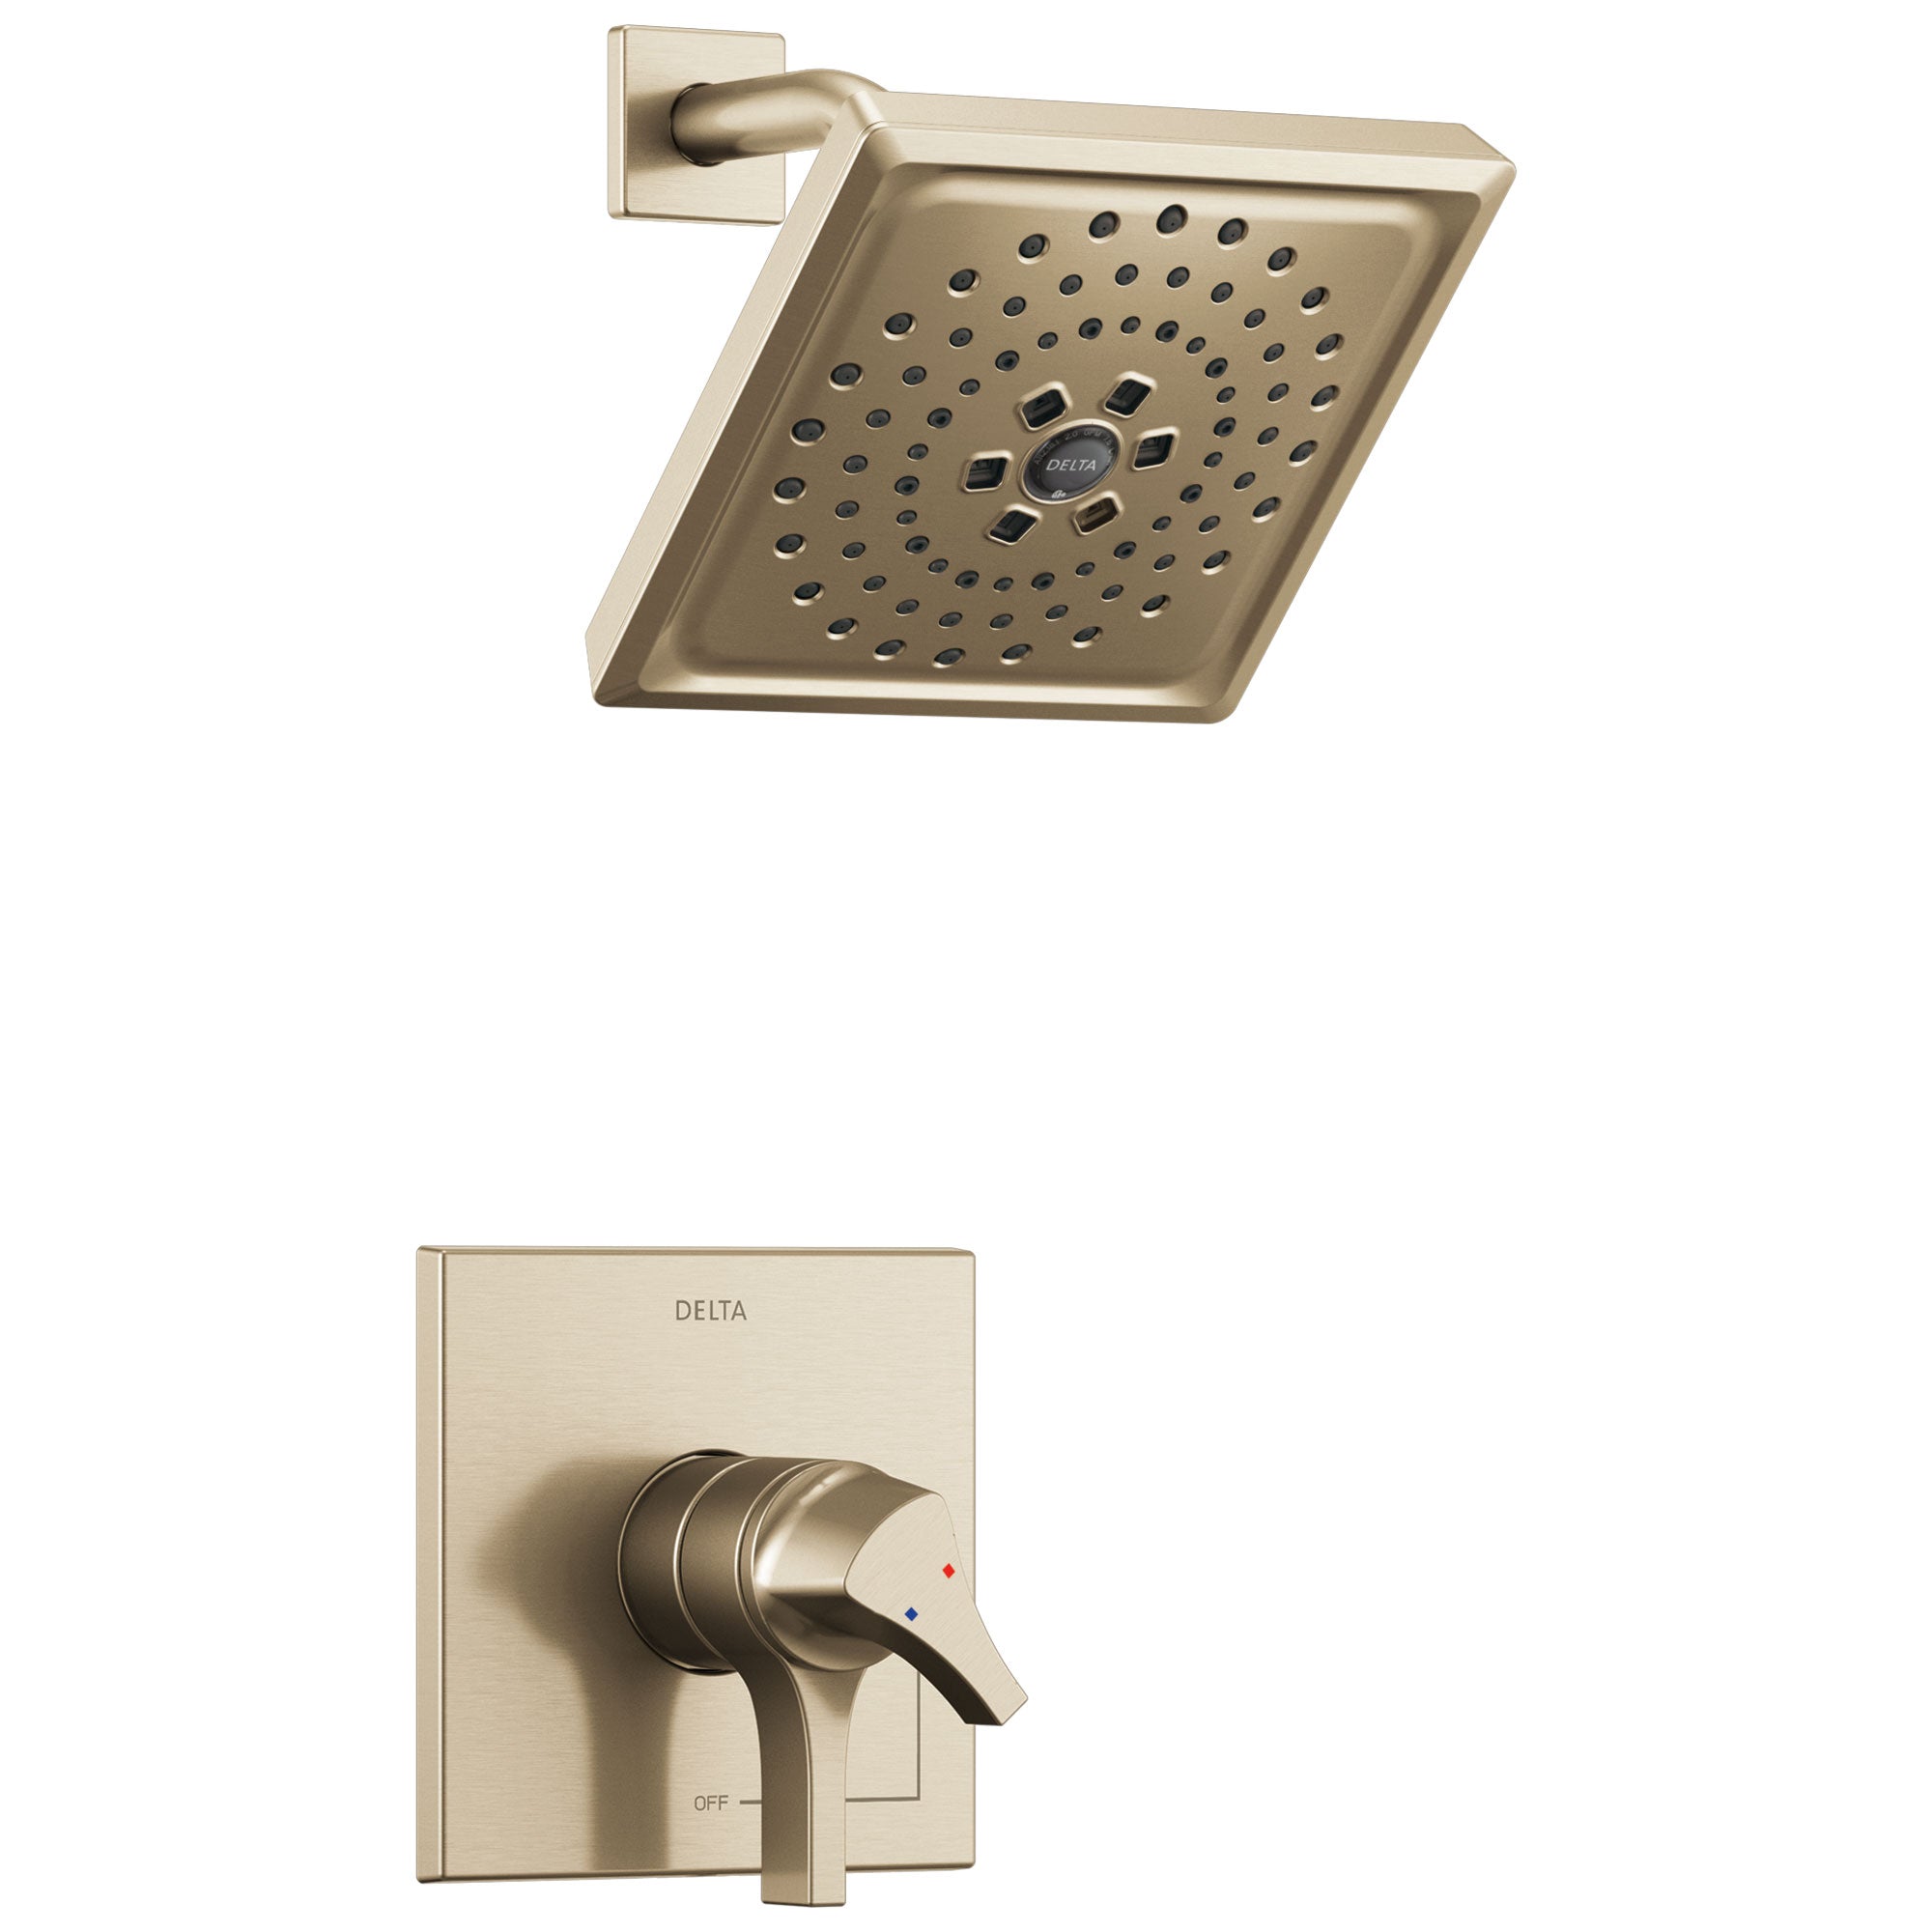 Delta Zura Champagne Bronze Finish Monitor 17 Series H2Okinetic Shower Only Faucet with Handles, Cartridge, and Valve with Stops D3372V